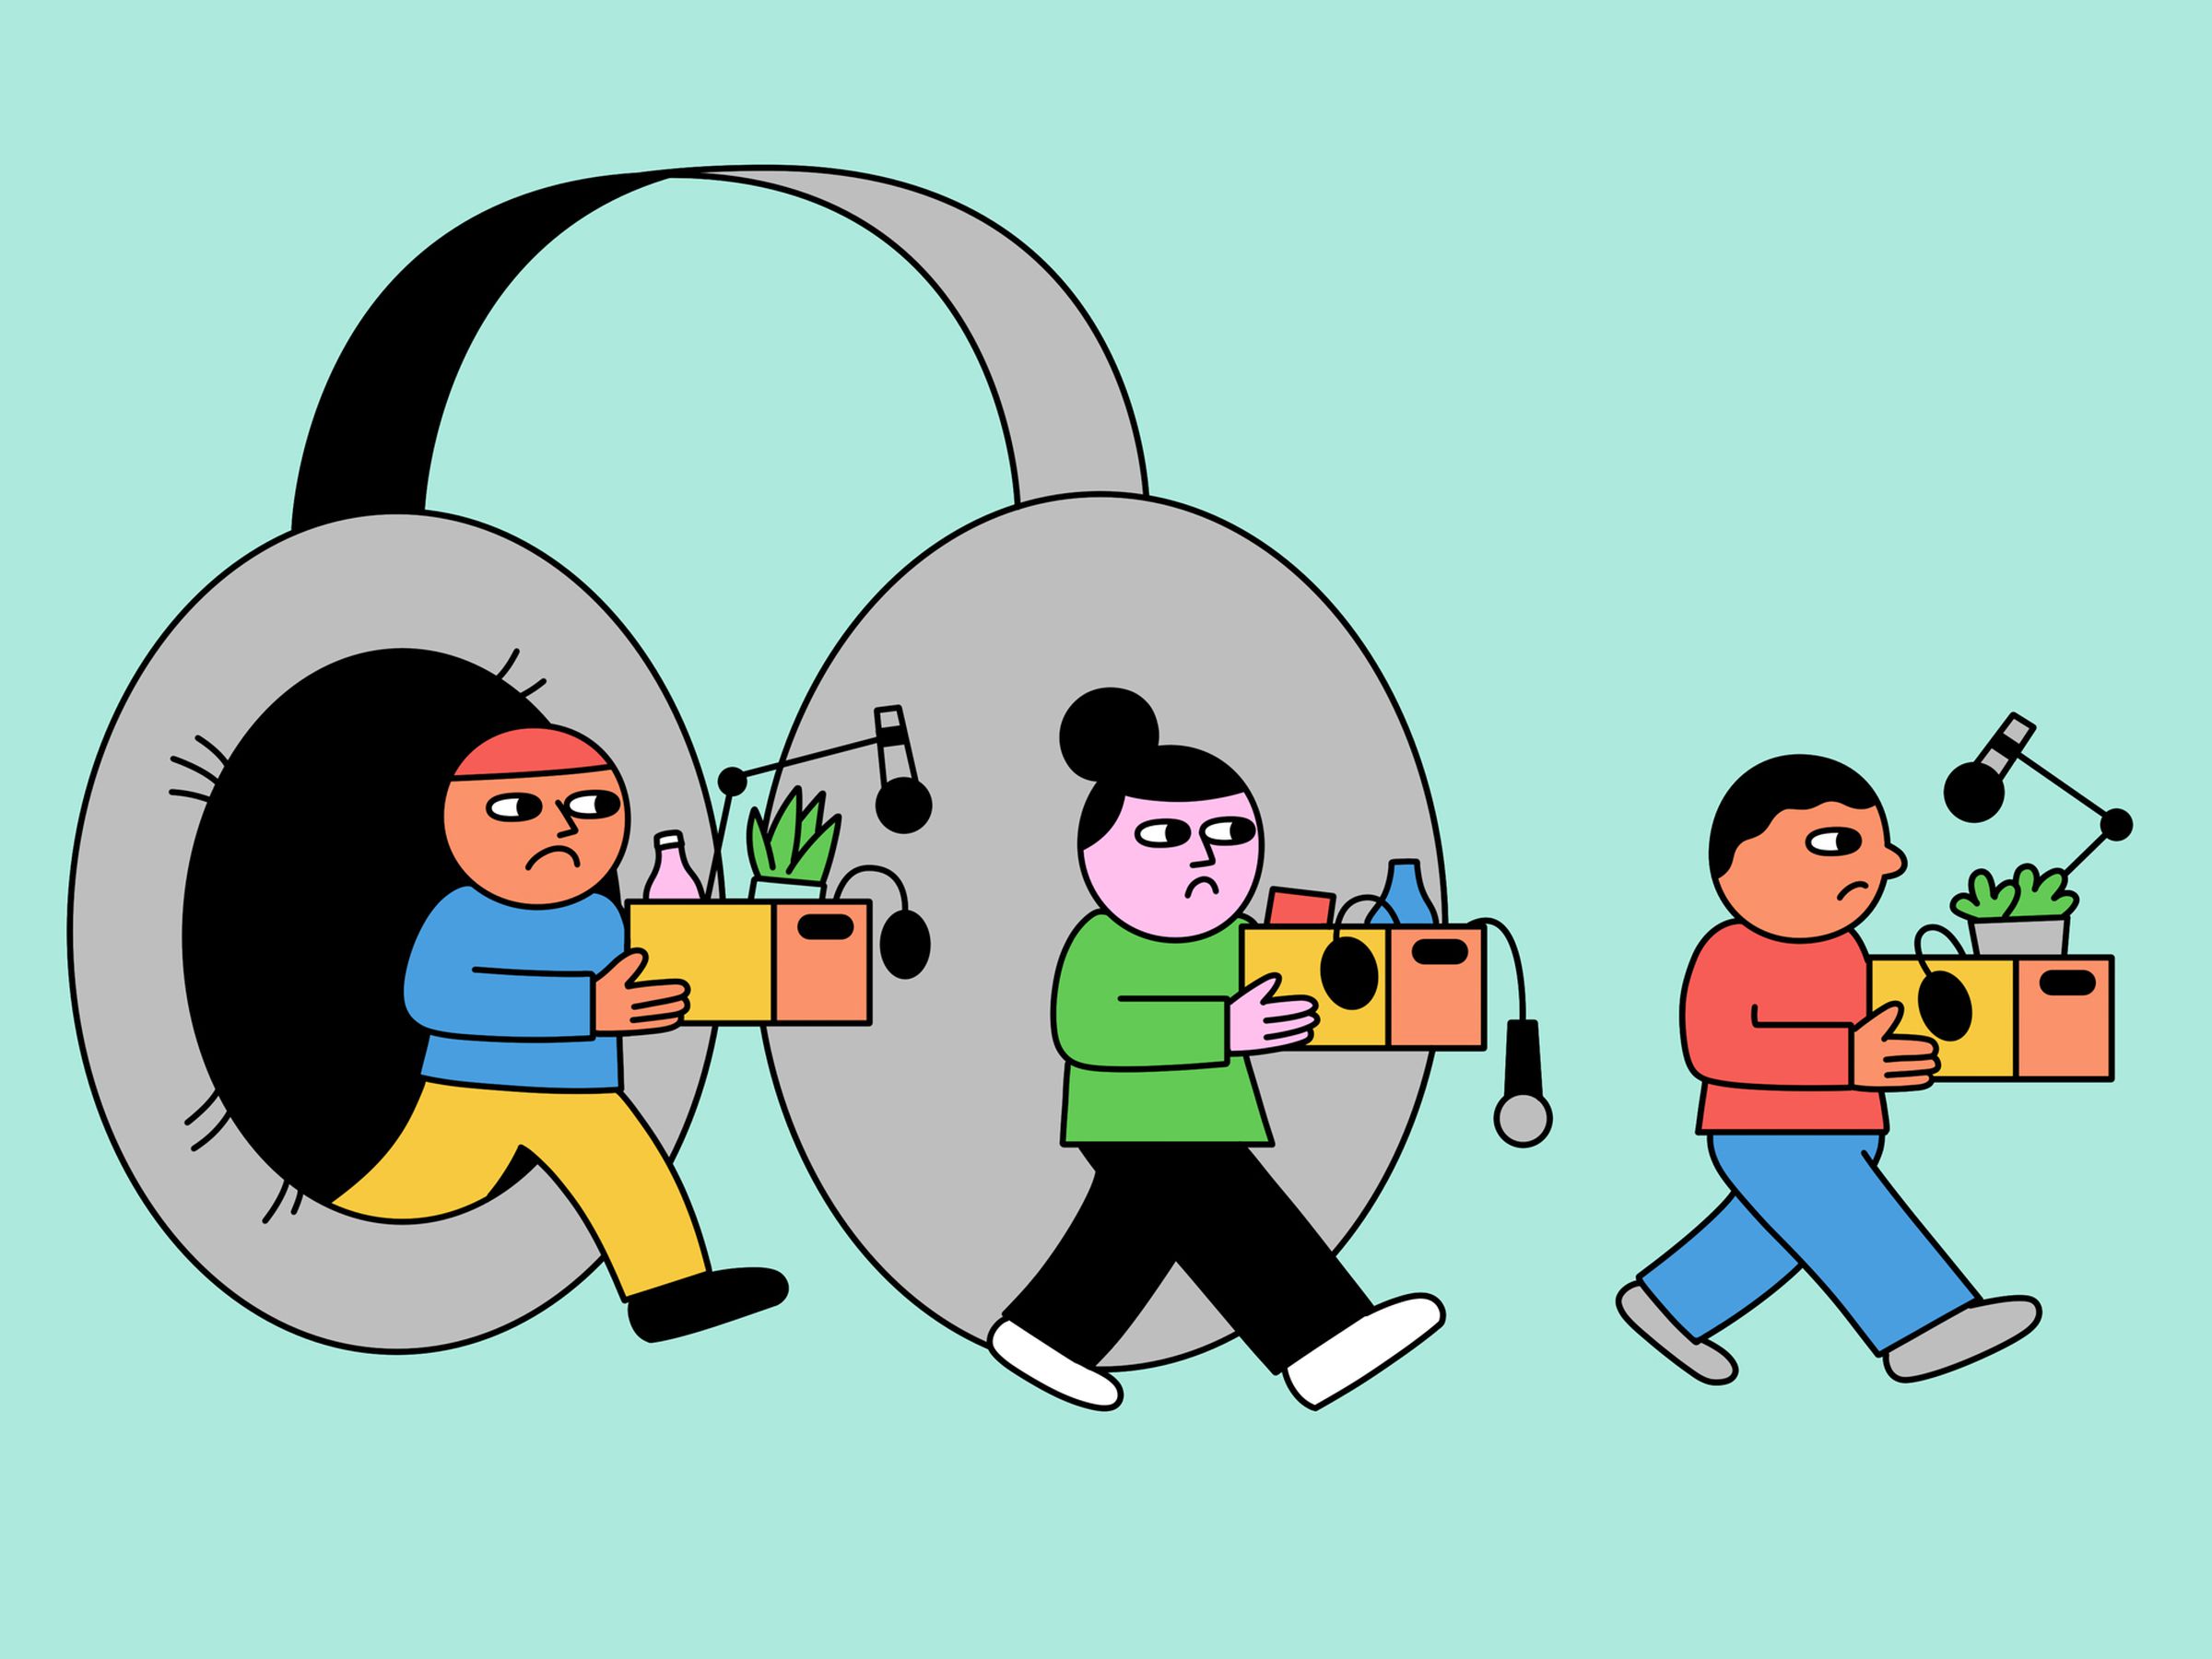 An illustration of three people stepping out of a pair of headphones with the contents of their desks packed up in boxes.